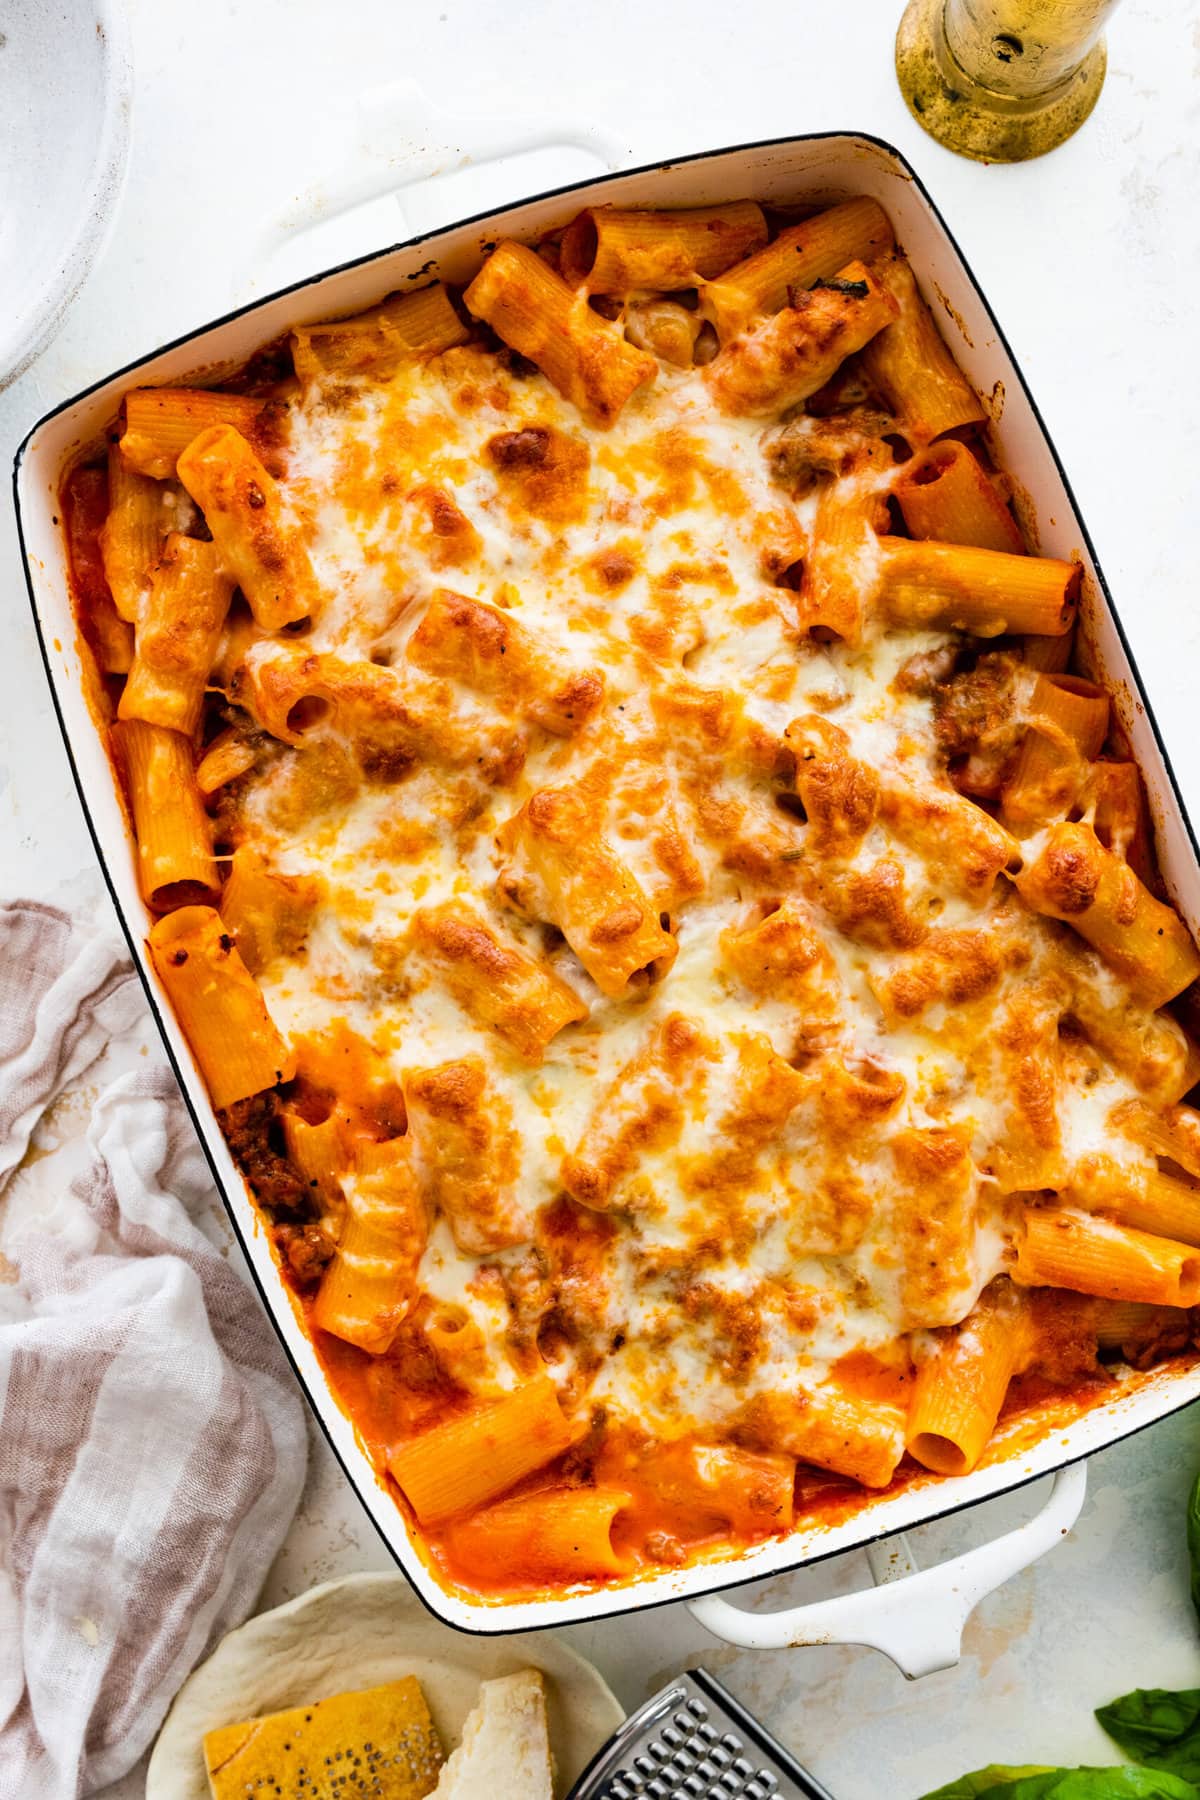 baked cheesy classic pasta al forno recipe out of the oven in a white baking pan.